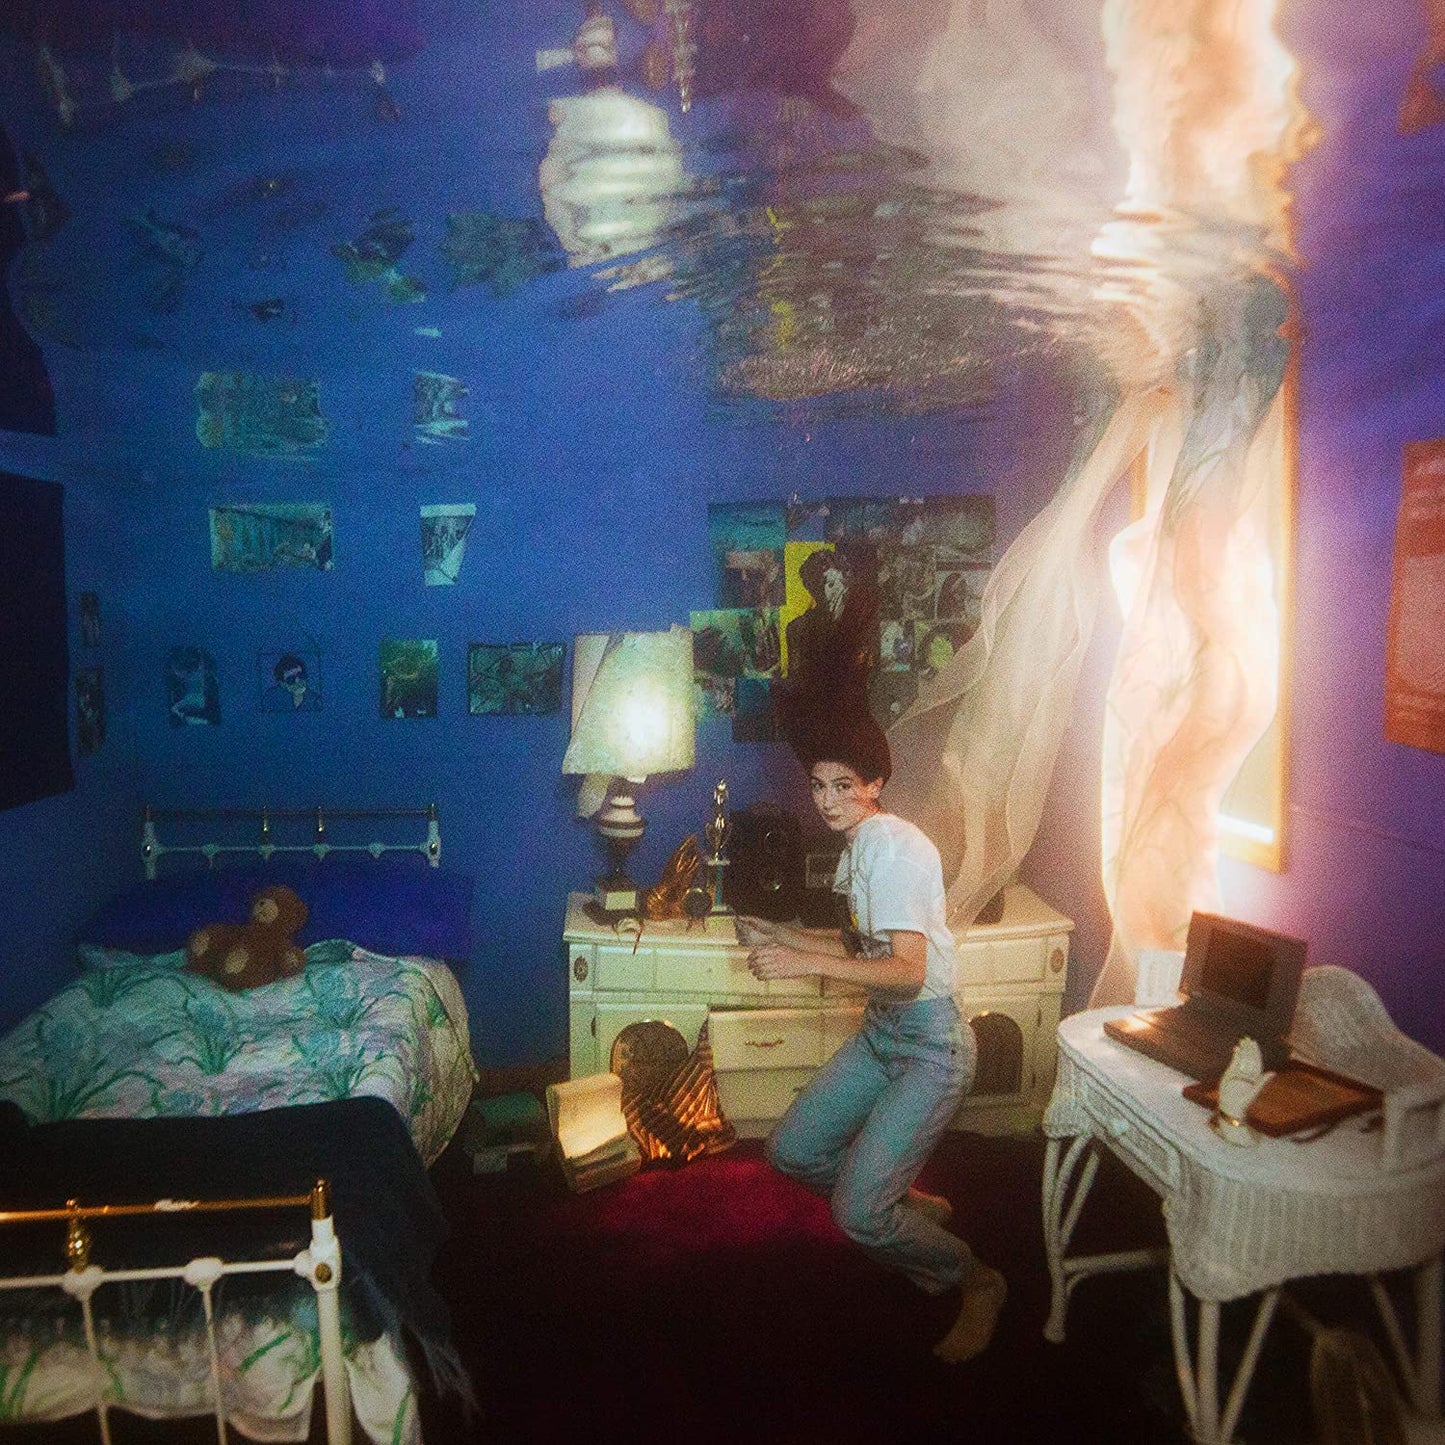 Through her latest album on Vinyl, Titanic Rising, Weyes Blood, a.k.a. Natalie Mering, has designed her own universe to soulfully navigate life’s mysteries.